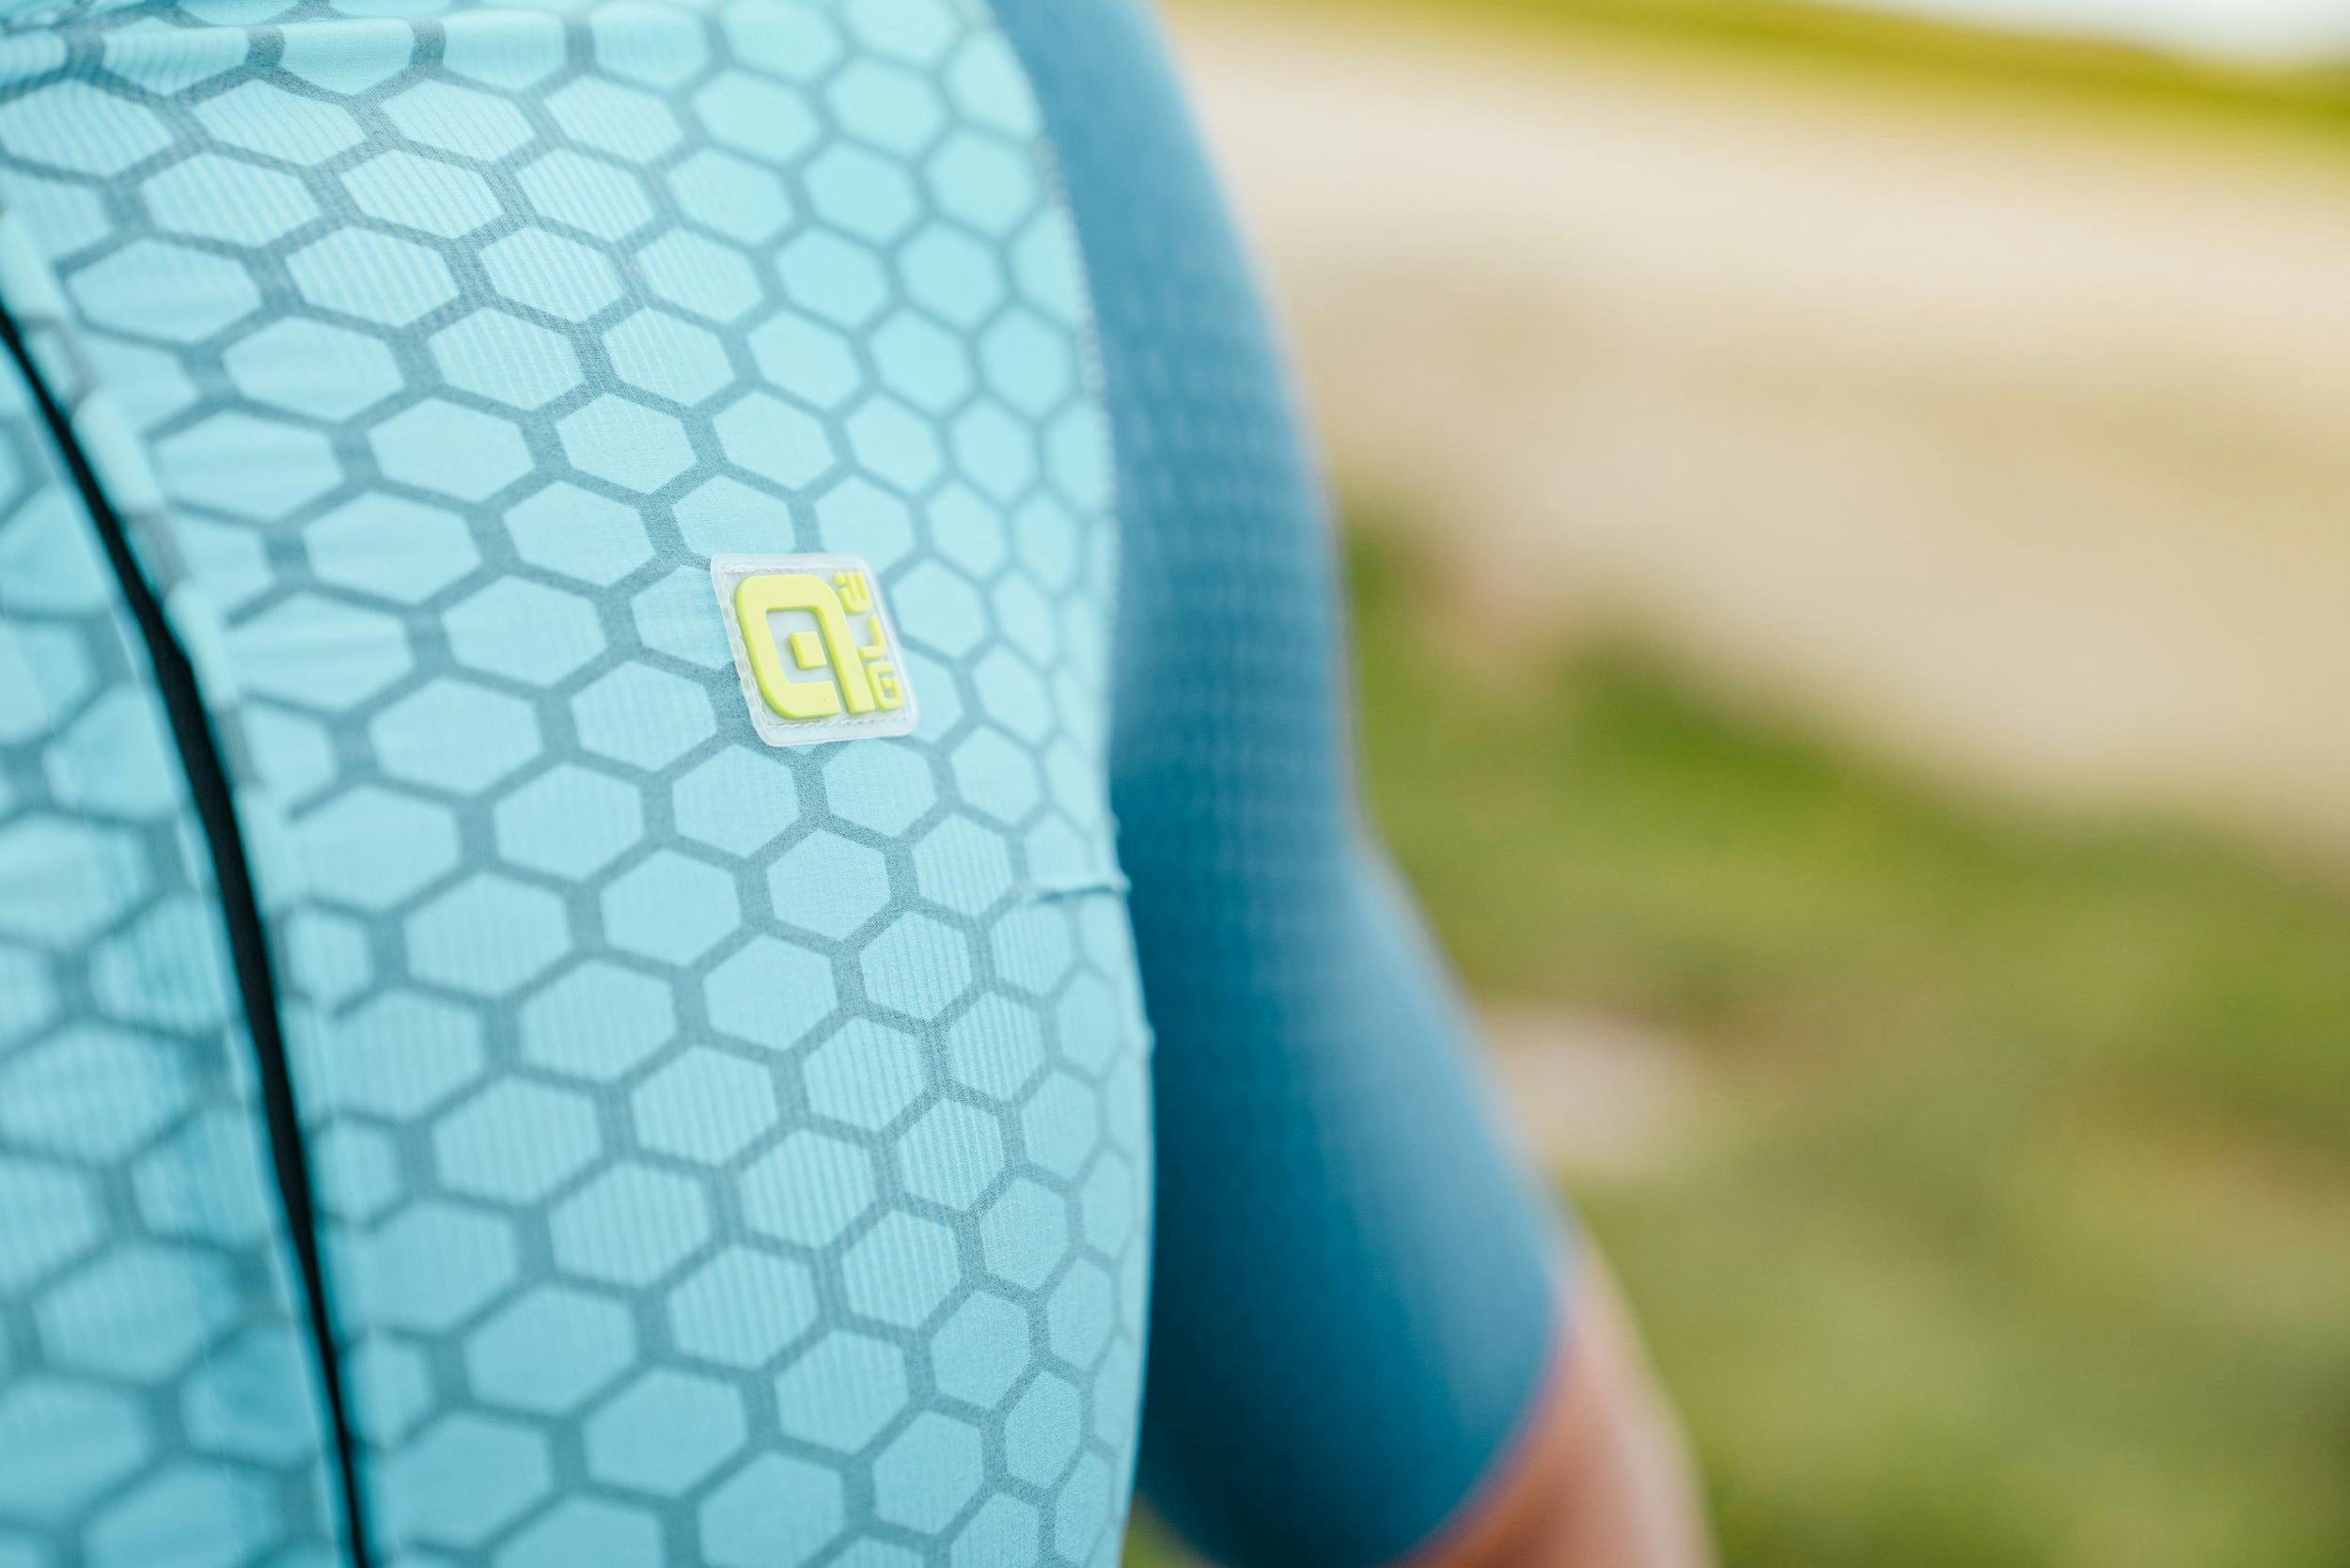 The new Velocity G+ jersey features graphene technology to regulate body temperature. – Photo Alé 